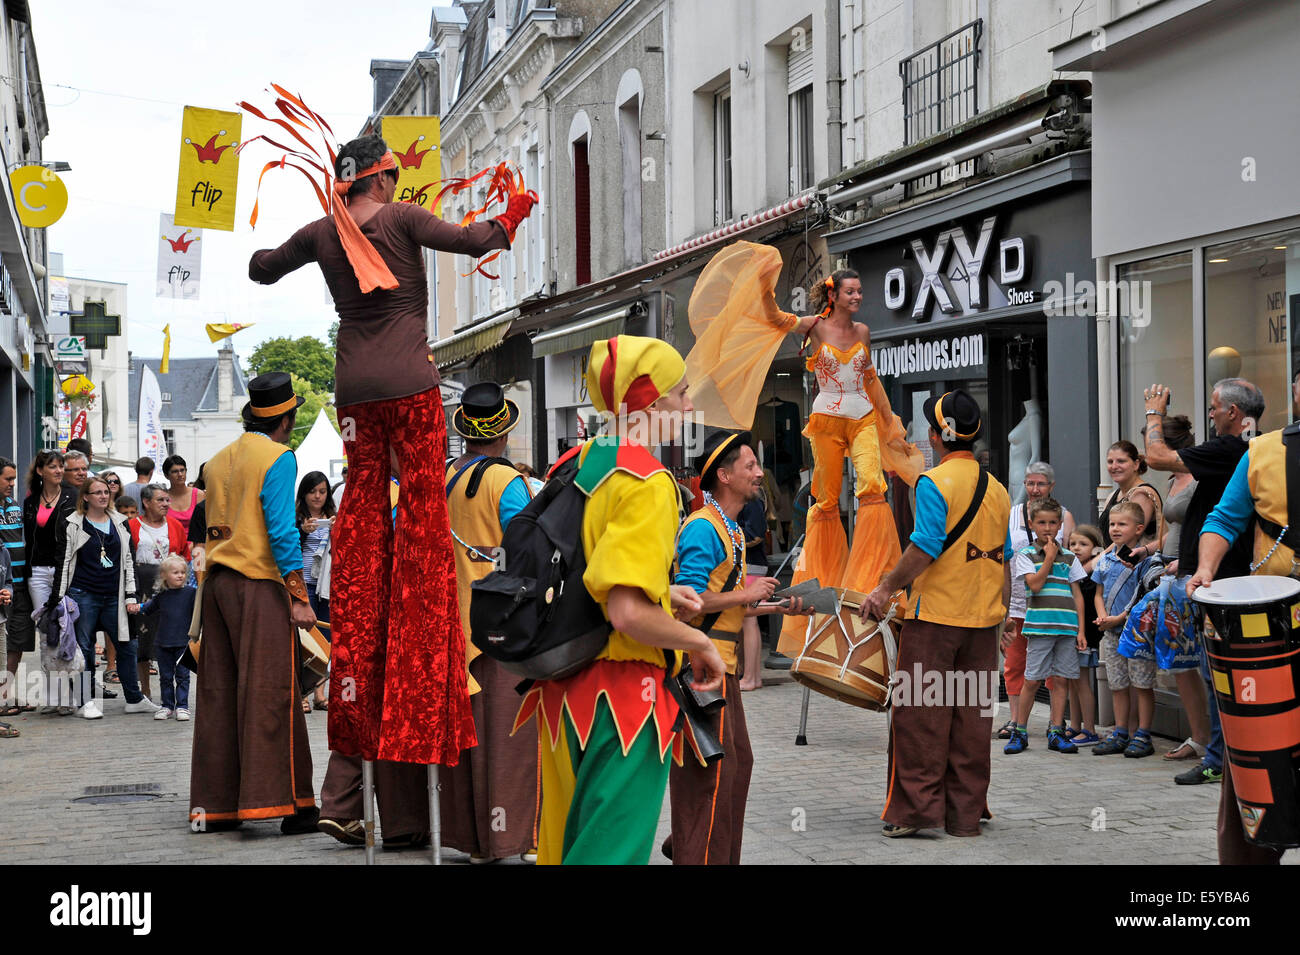 Street entertainers performing at the Flip games festival in Parthenay Deux-Sevres France Stock Photo